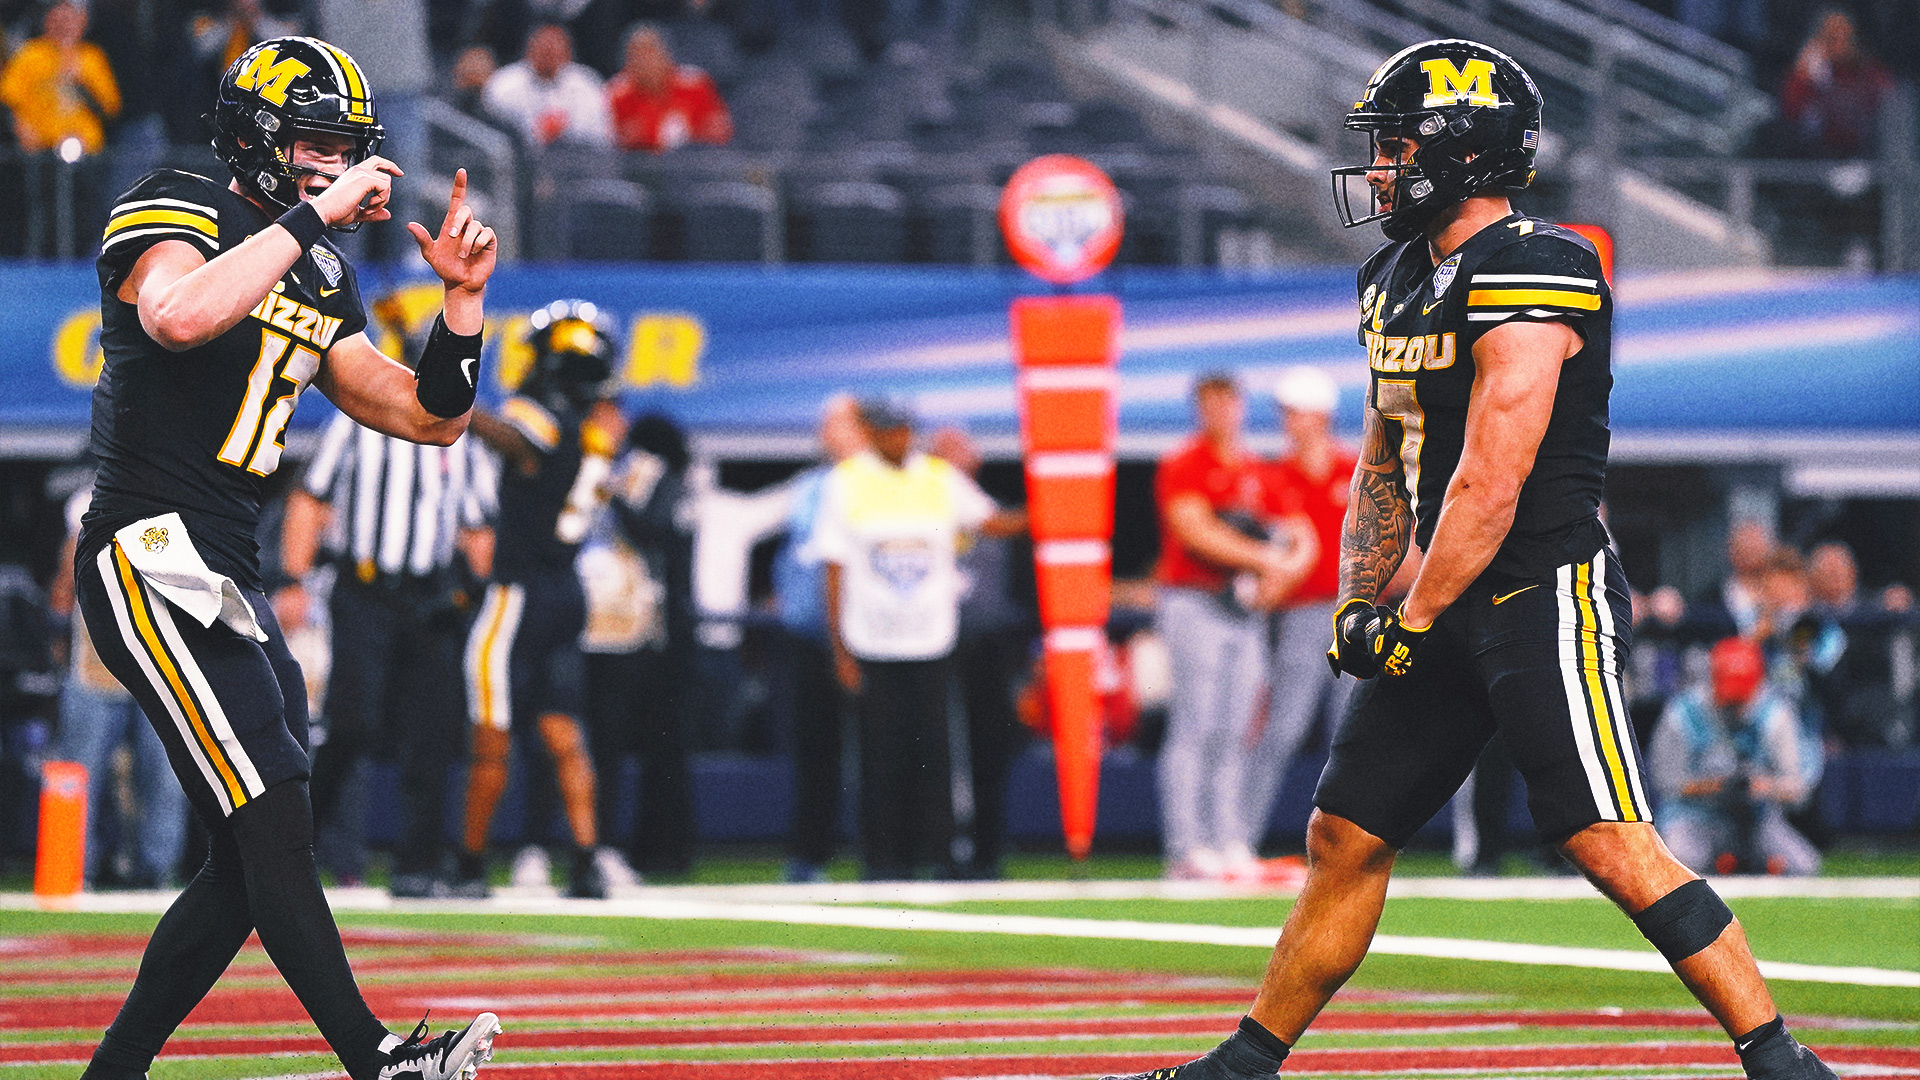 Cody Schrader runs for 128 yards and a TD as No. 9 Missouri beats No. 7 Ohio State 14-3 in Cotton Bowl